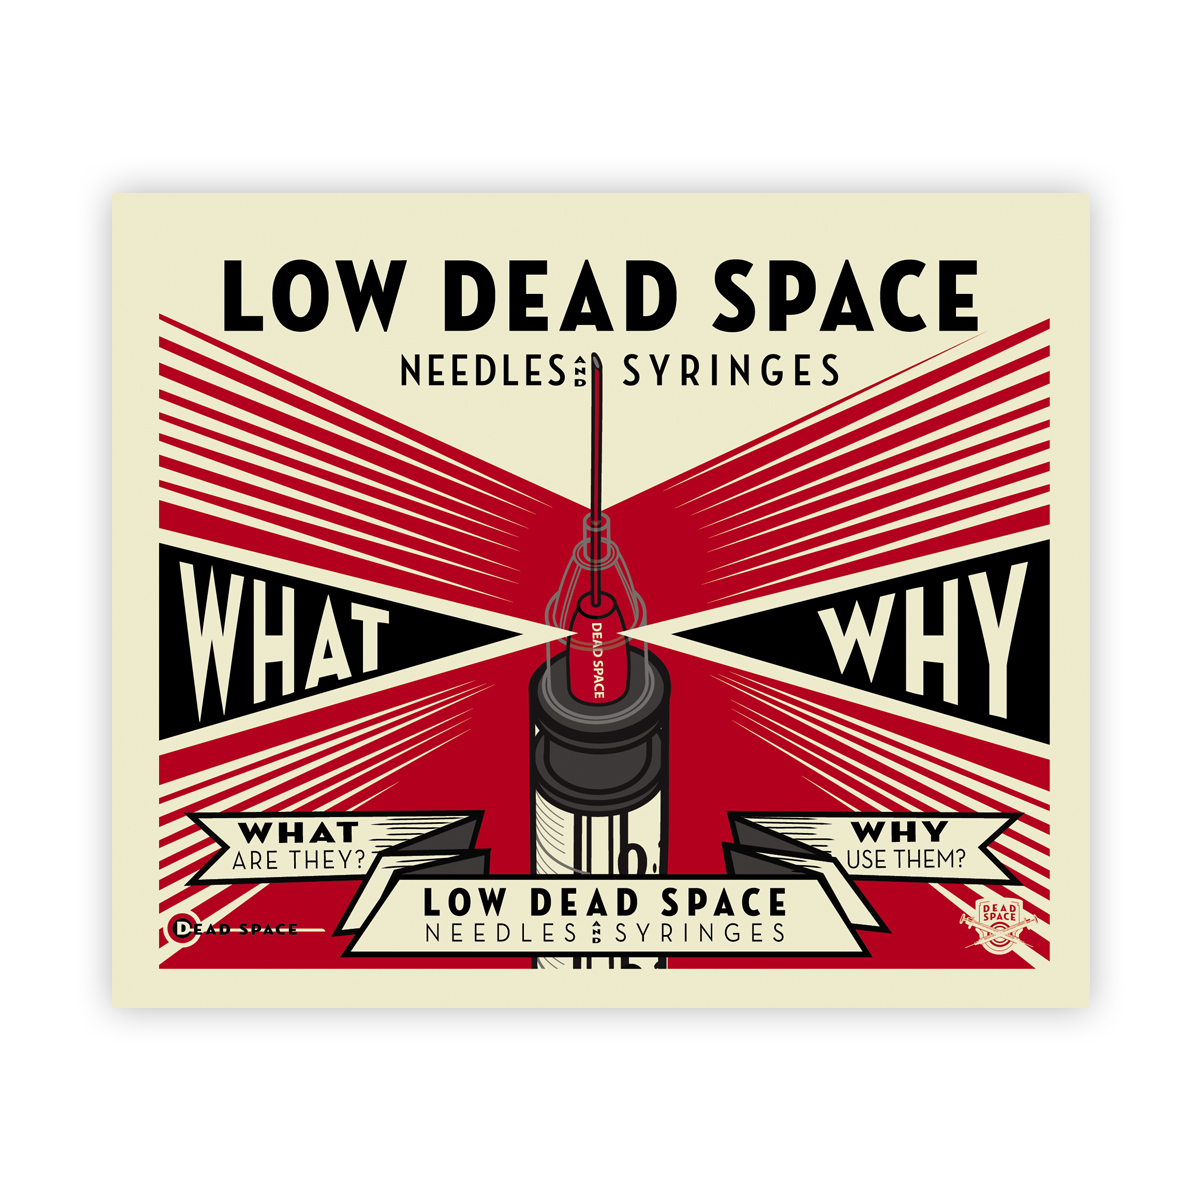 Low dead space needles and syringes: what and why? booklet